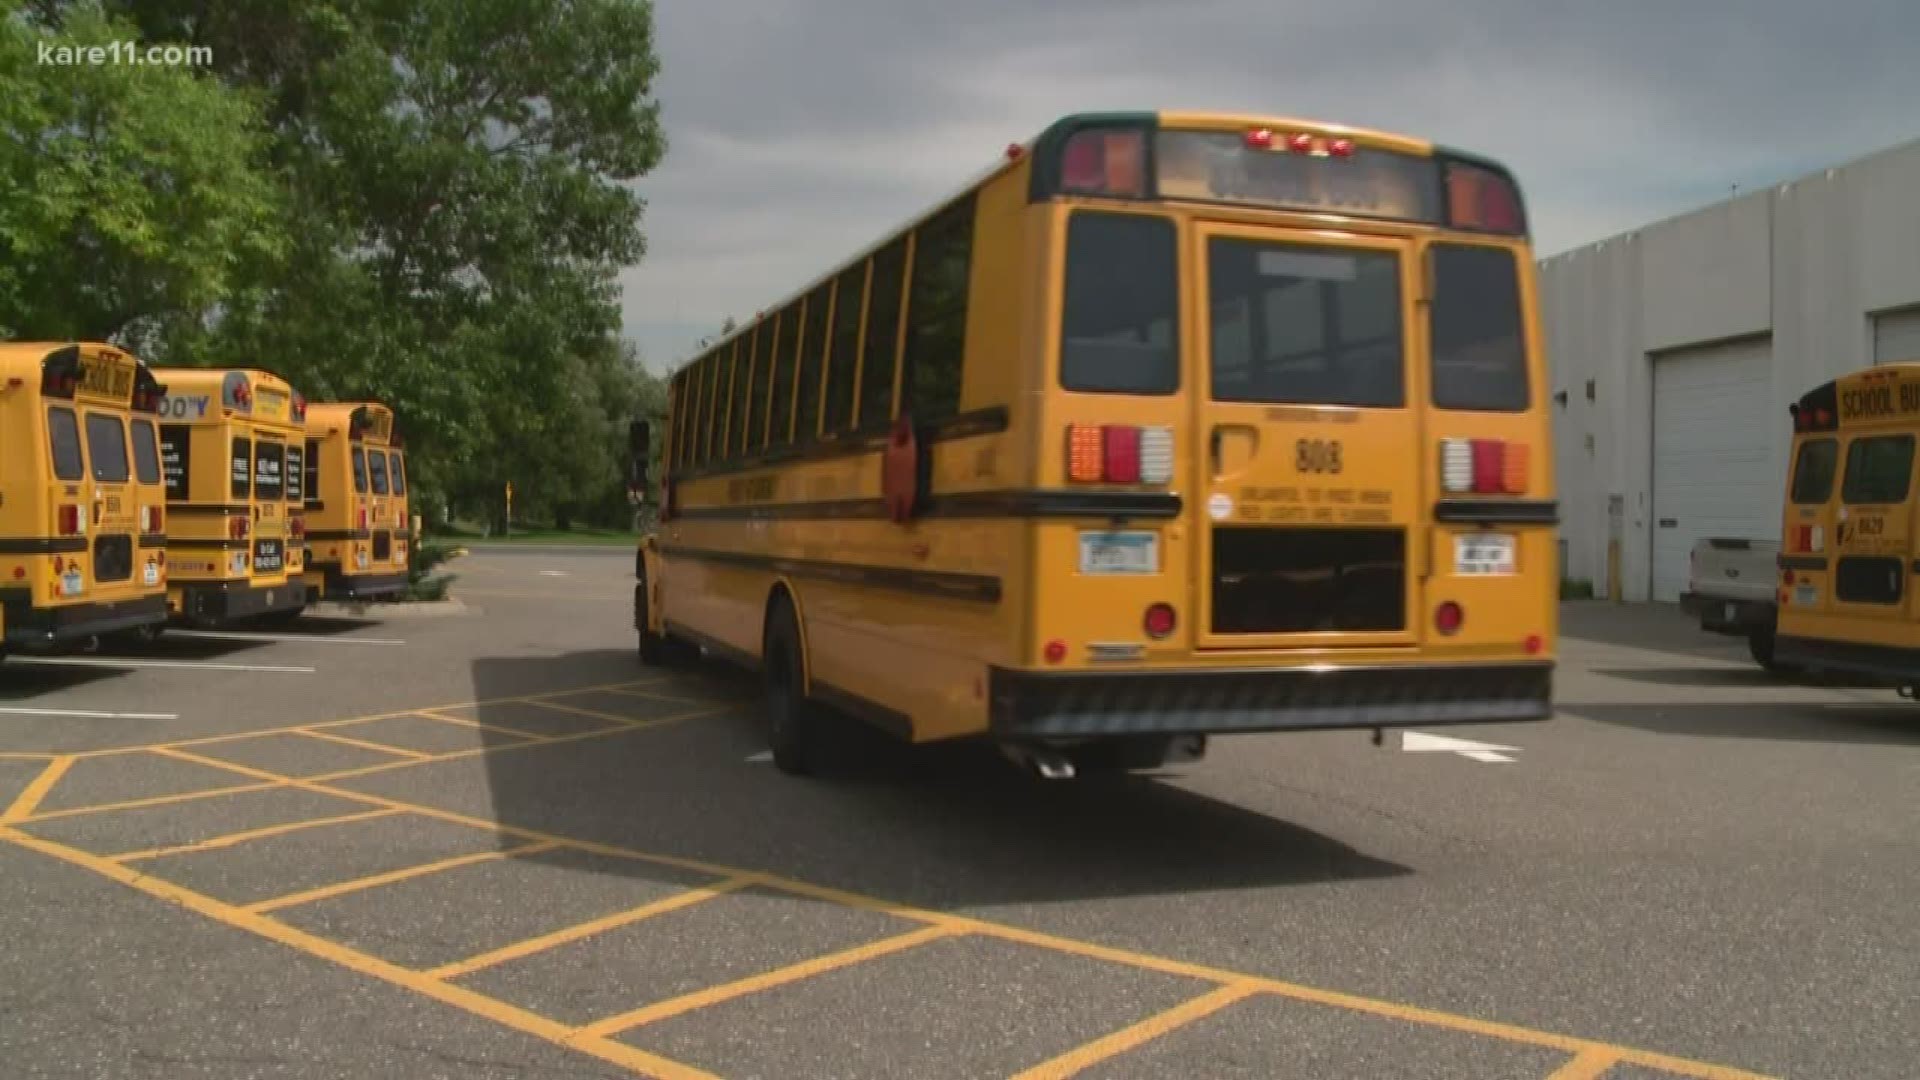 More than 760,000 students statewide ride a bus to and from school every day.